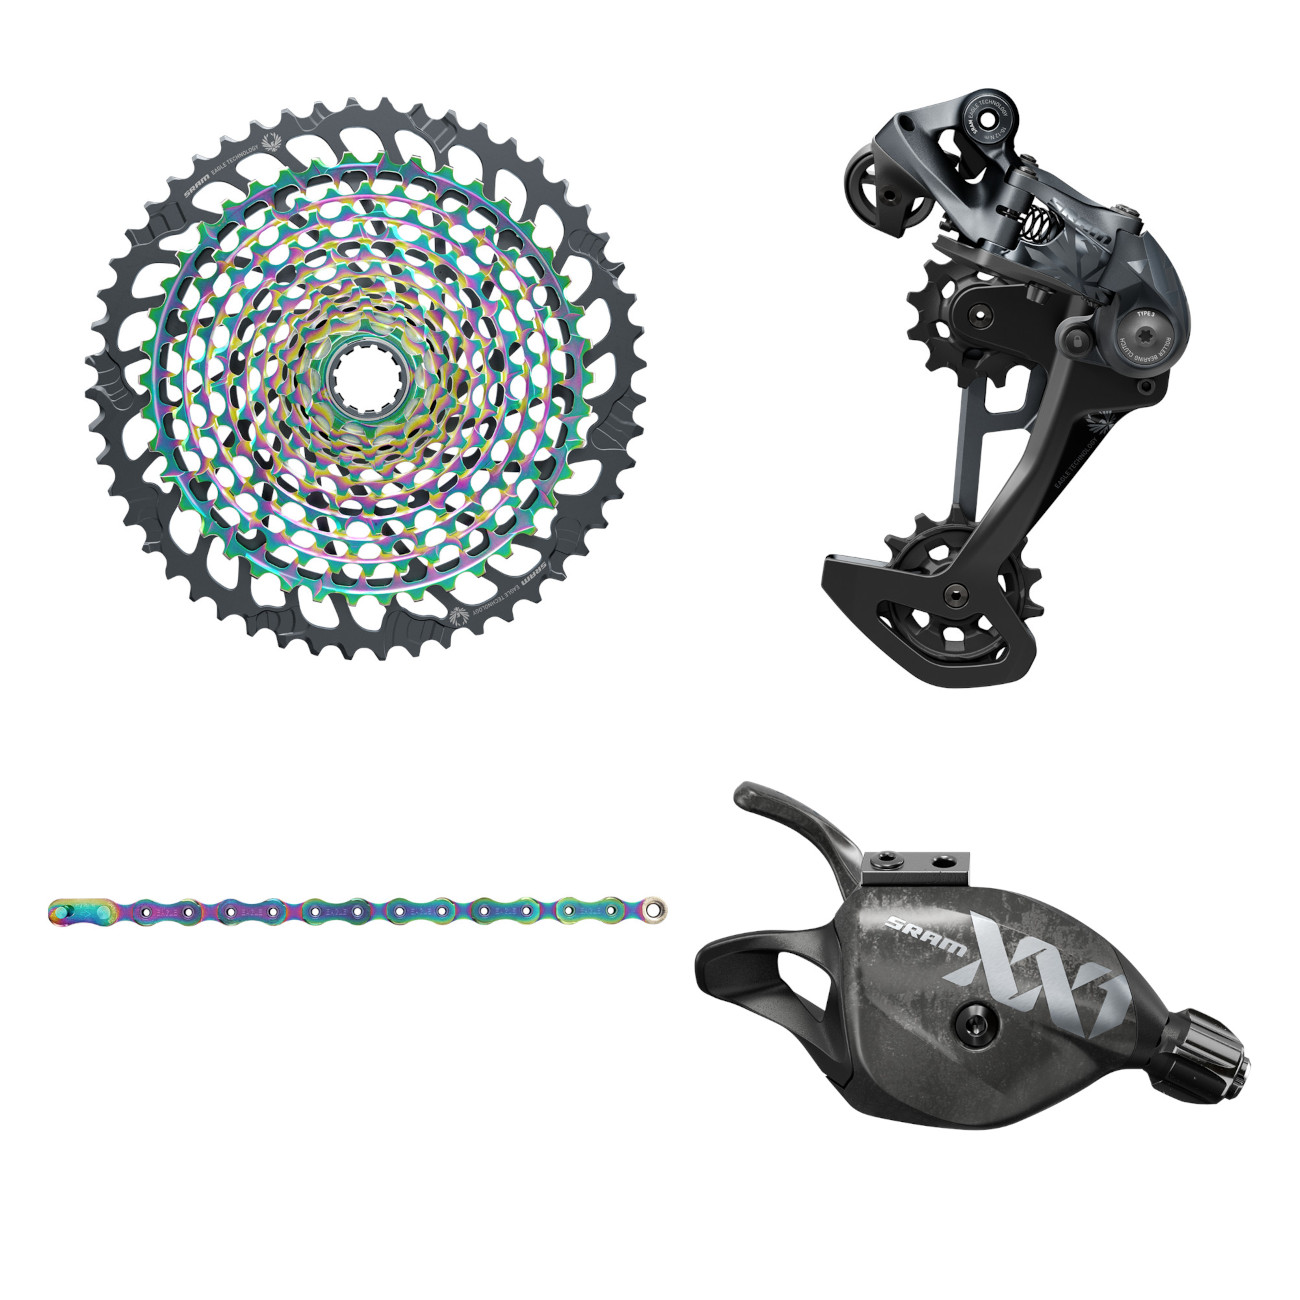 Picture of SRAM XX1 Eagle 1x12-speed Upgrade Kit - Trigger Shifter - 10-52 t. XG-1299 Cassette - Rainbow